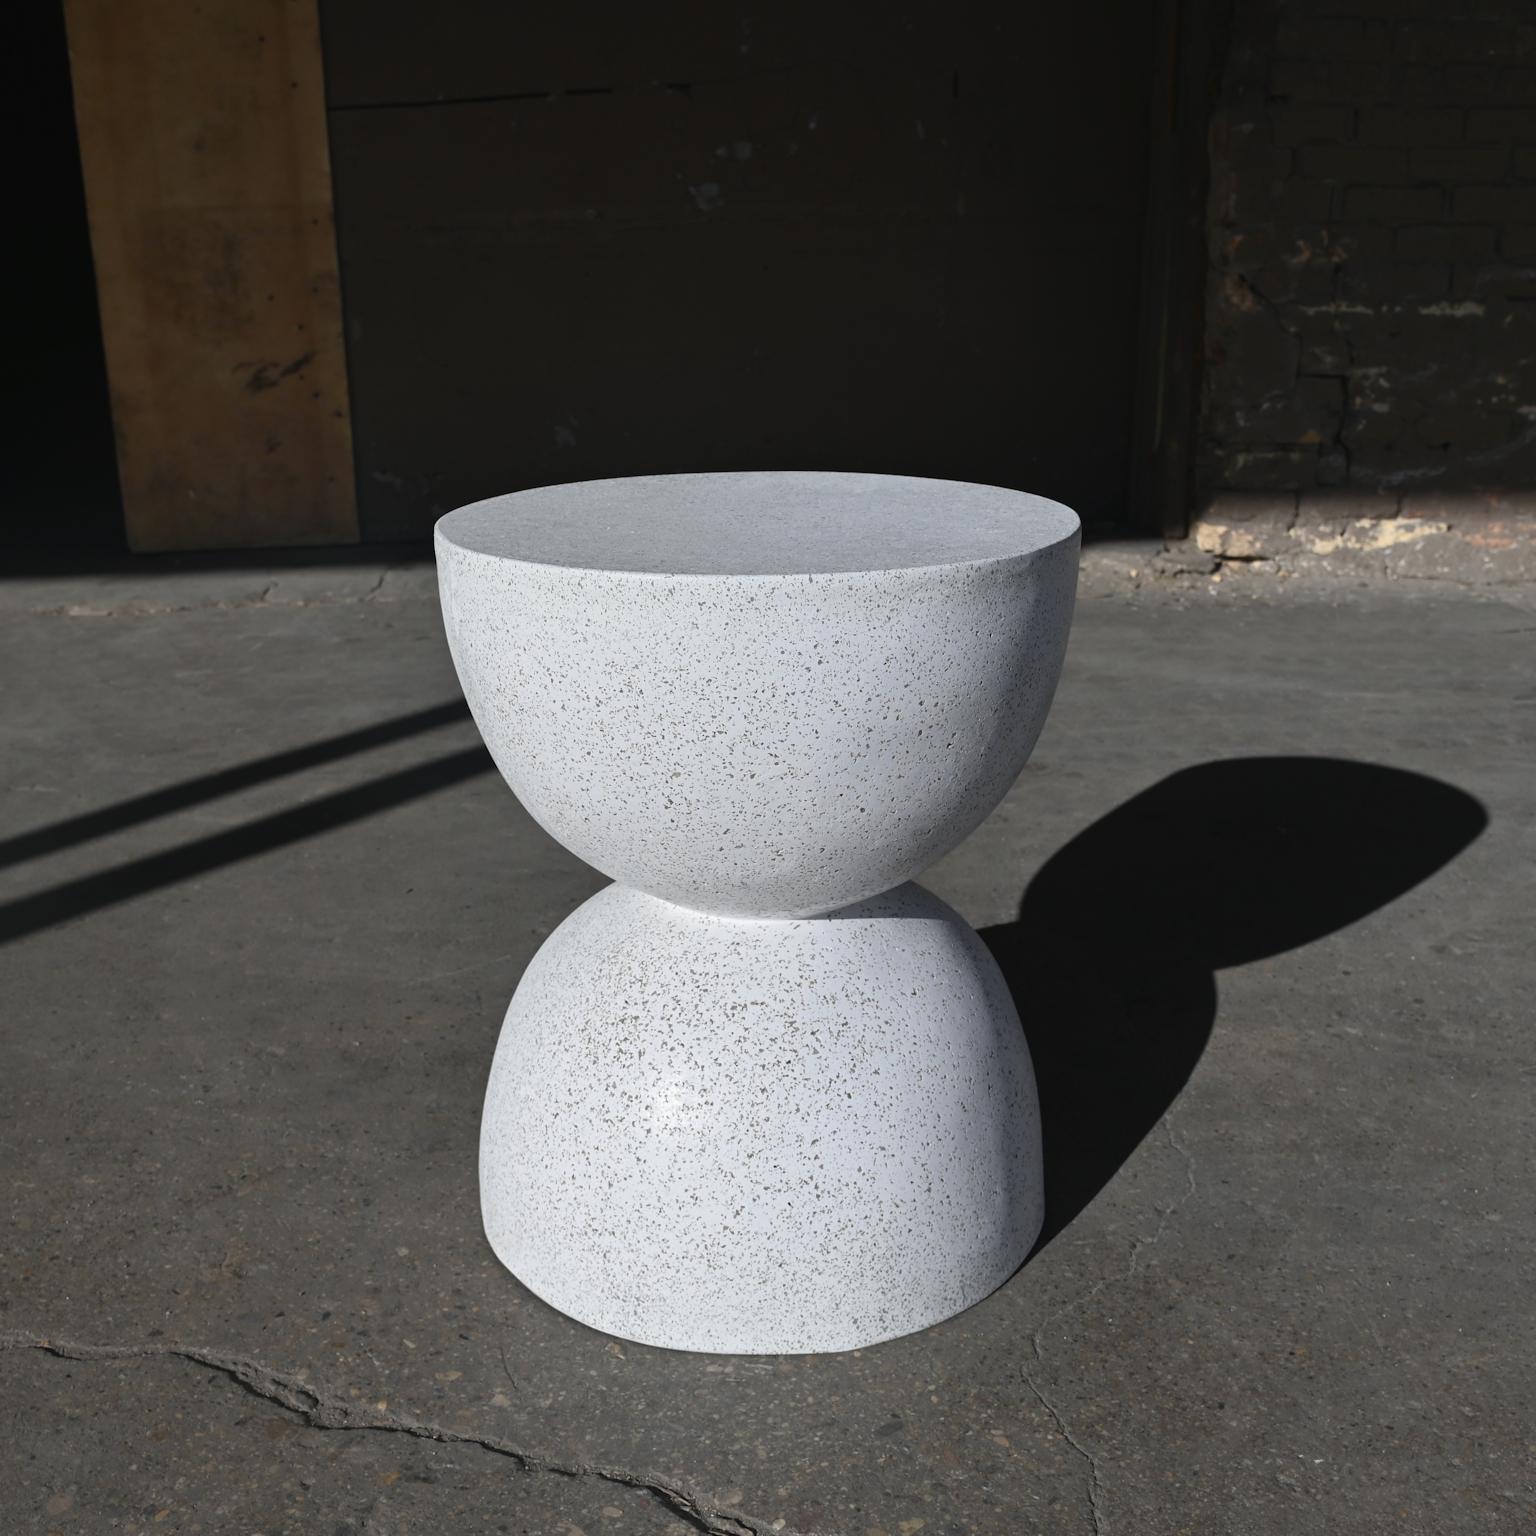 A symmetrical sculptural balance of elegance and function. 

Dimensions: Diameter 15 in. (38 cm), height 18 in. (46 cm). Weight 20 lbs. (9 kg).

Finish color options:
white stone
natural stone (shown)
aged stone
keystone
coal